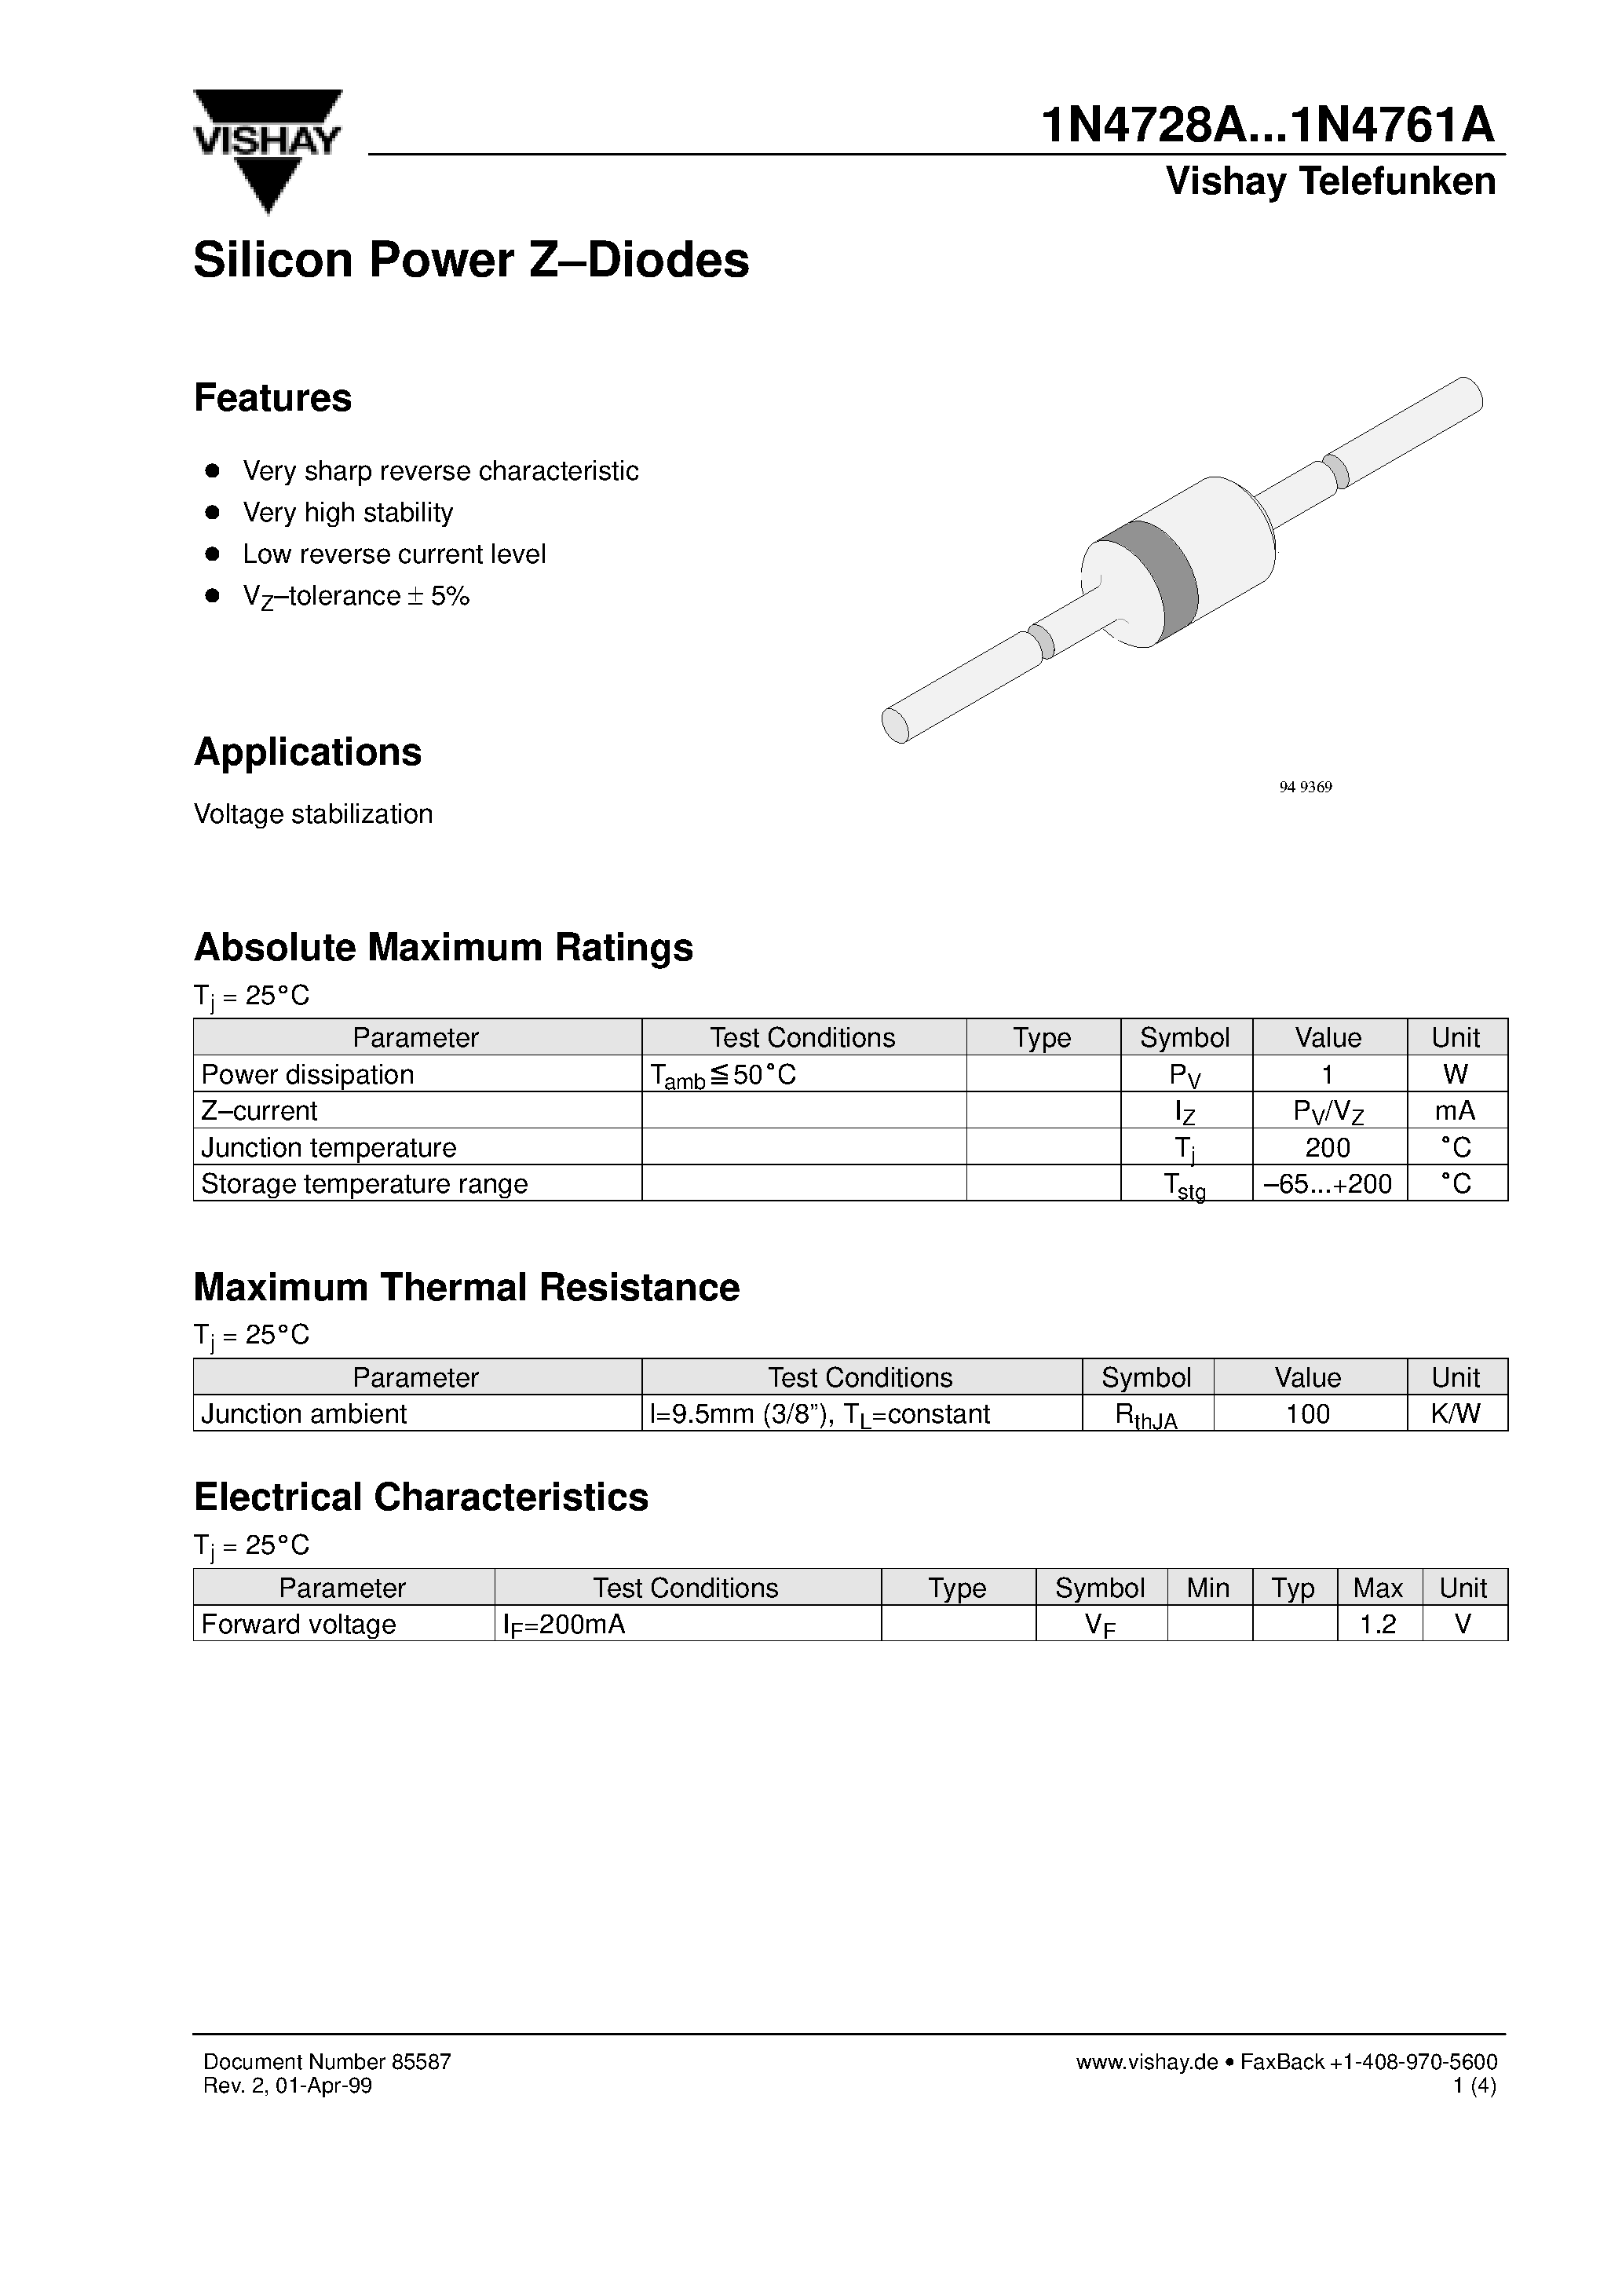 Даташит 1N4745A - Silicon Power Z-Diodes страница 1